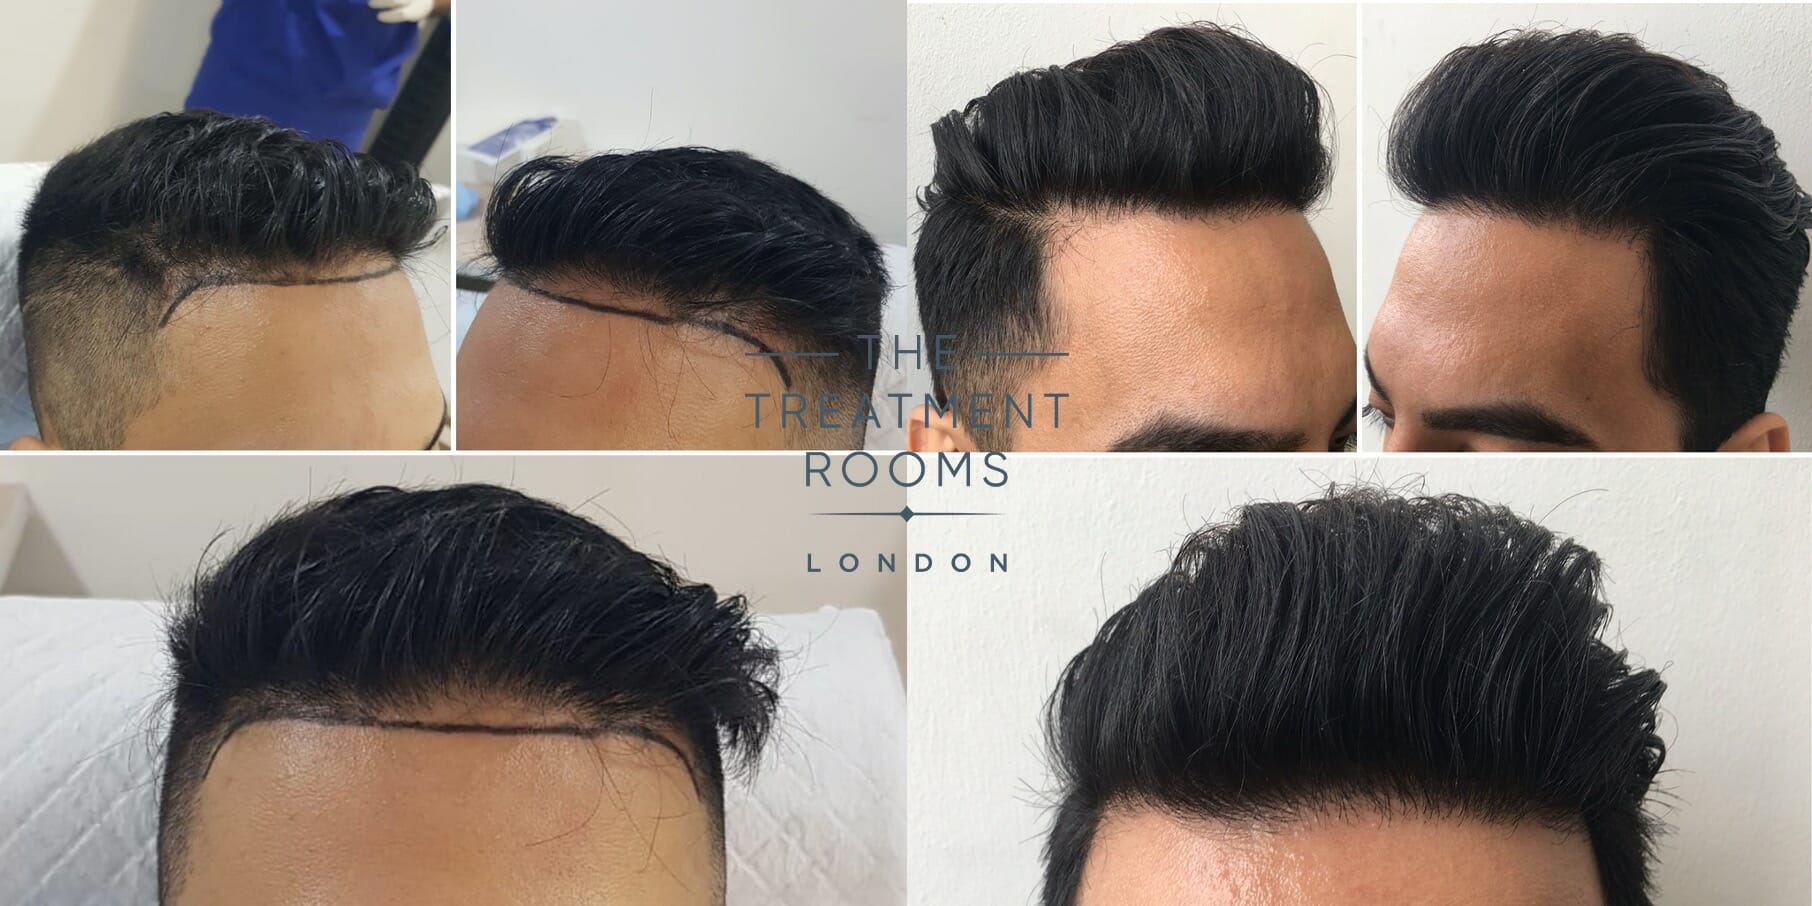 Before and after FUE hair transplant in London clinic